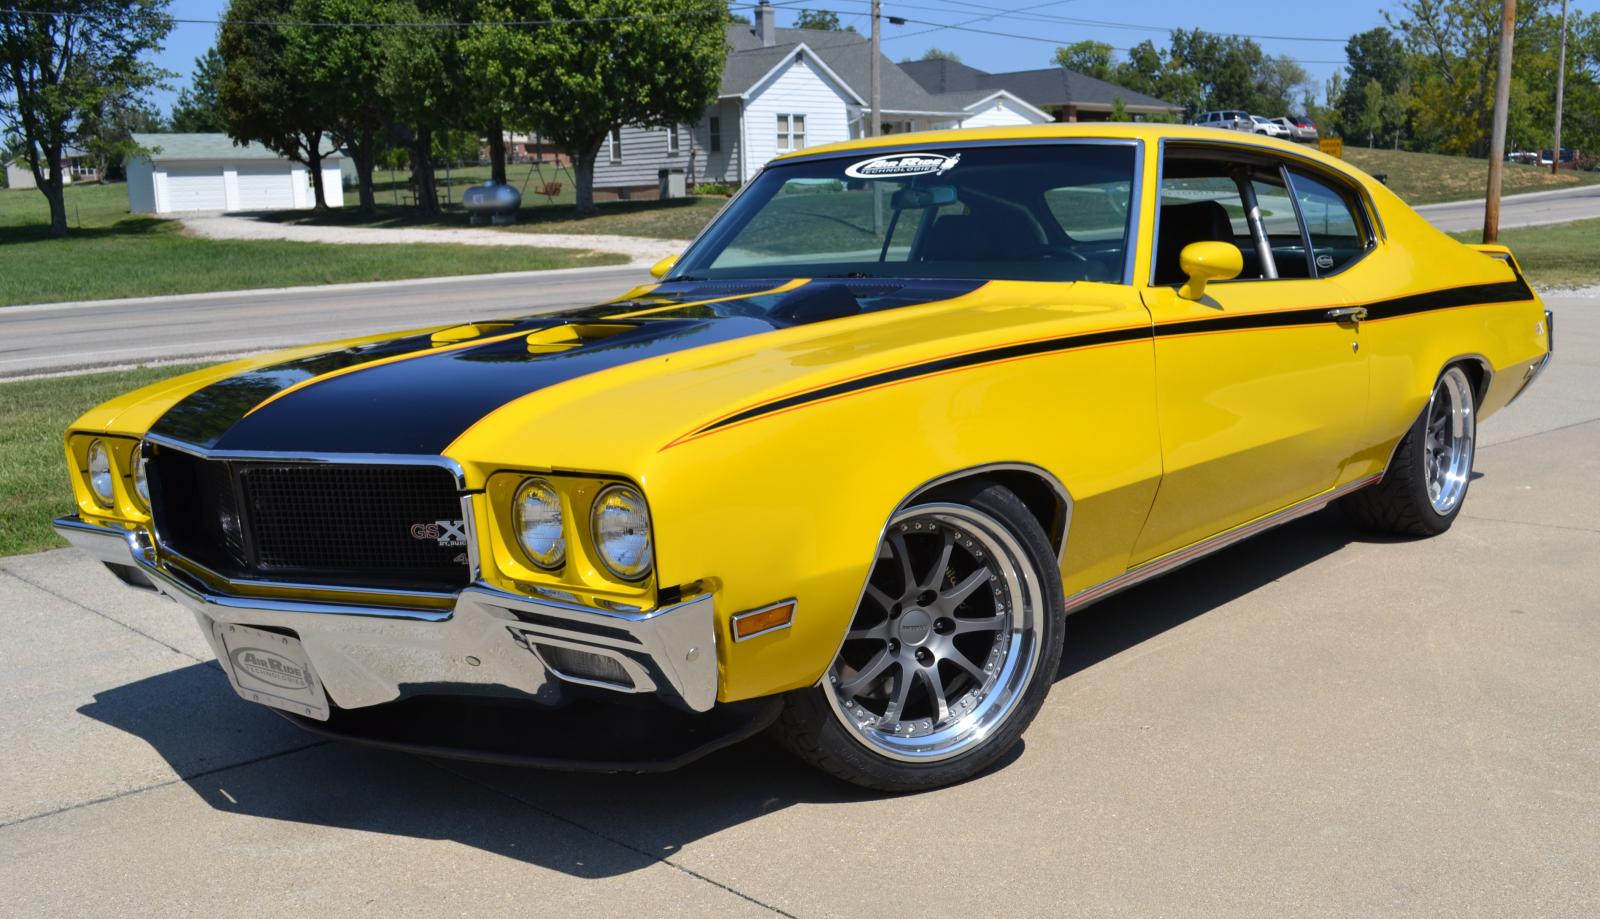 Buick GSX Pics, Vehicles Collection